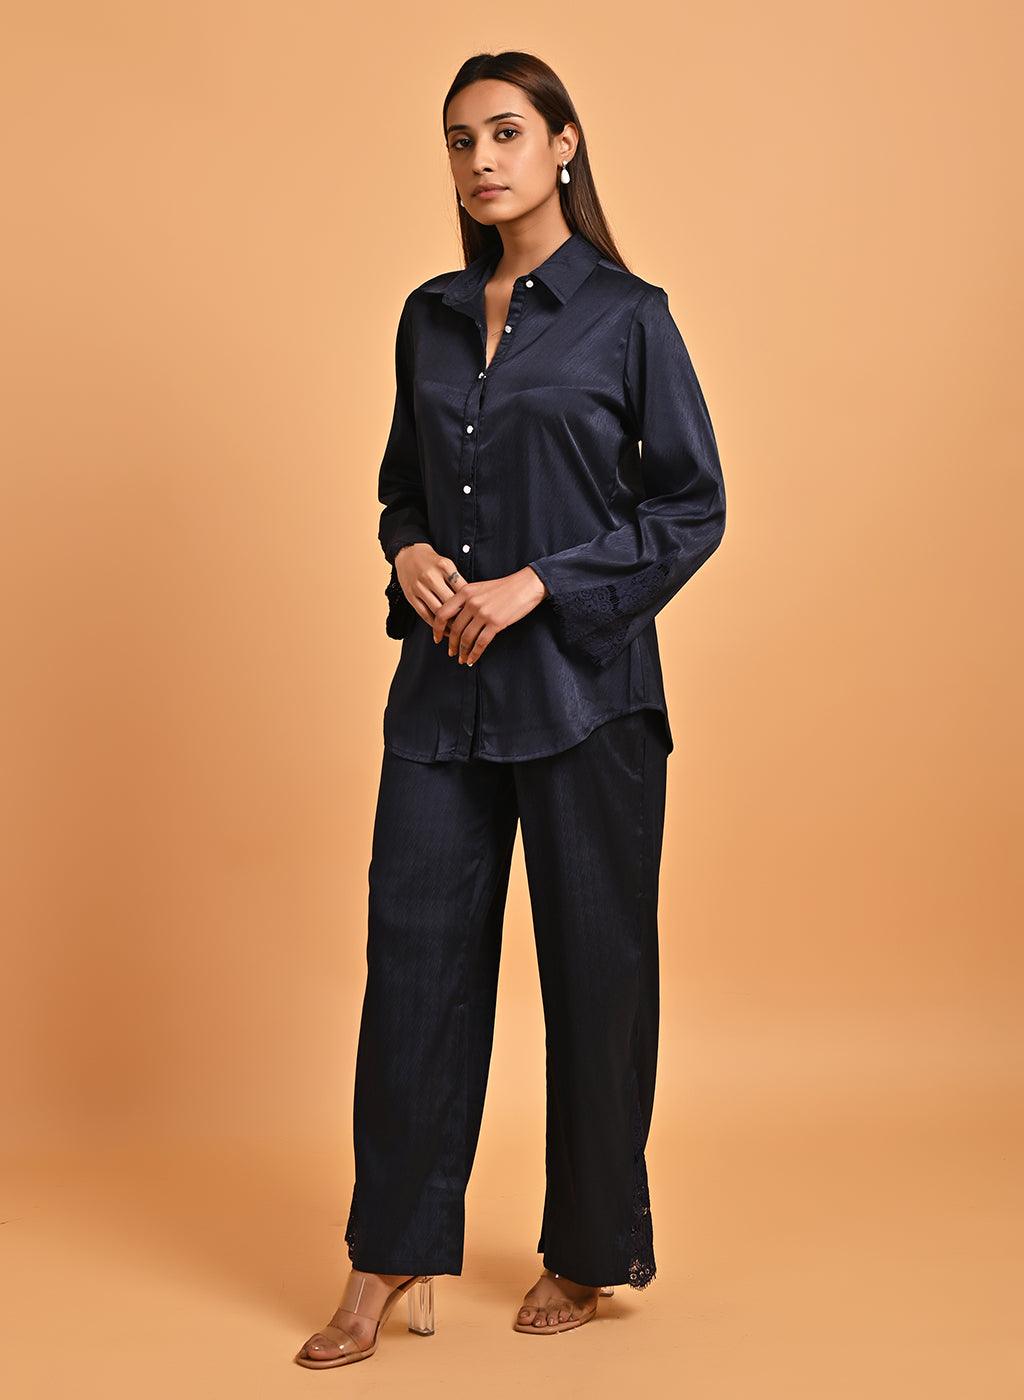 Midnight Blue Co-ord Set with Net Inserts at Sleeves - Lakshita